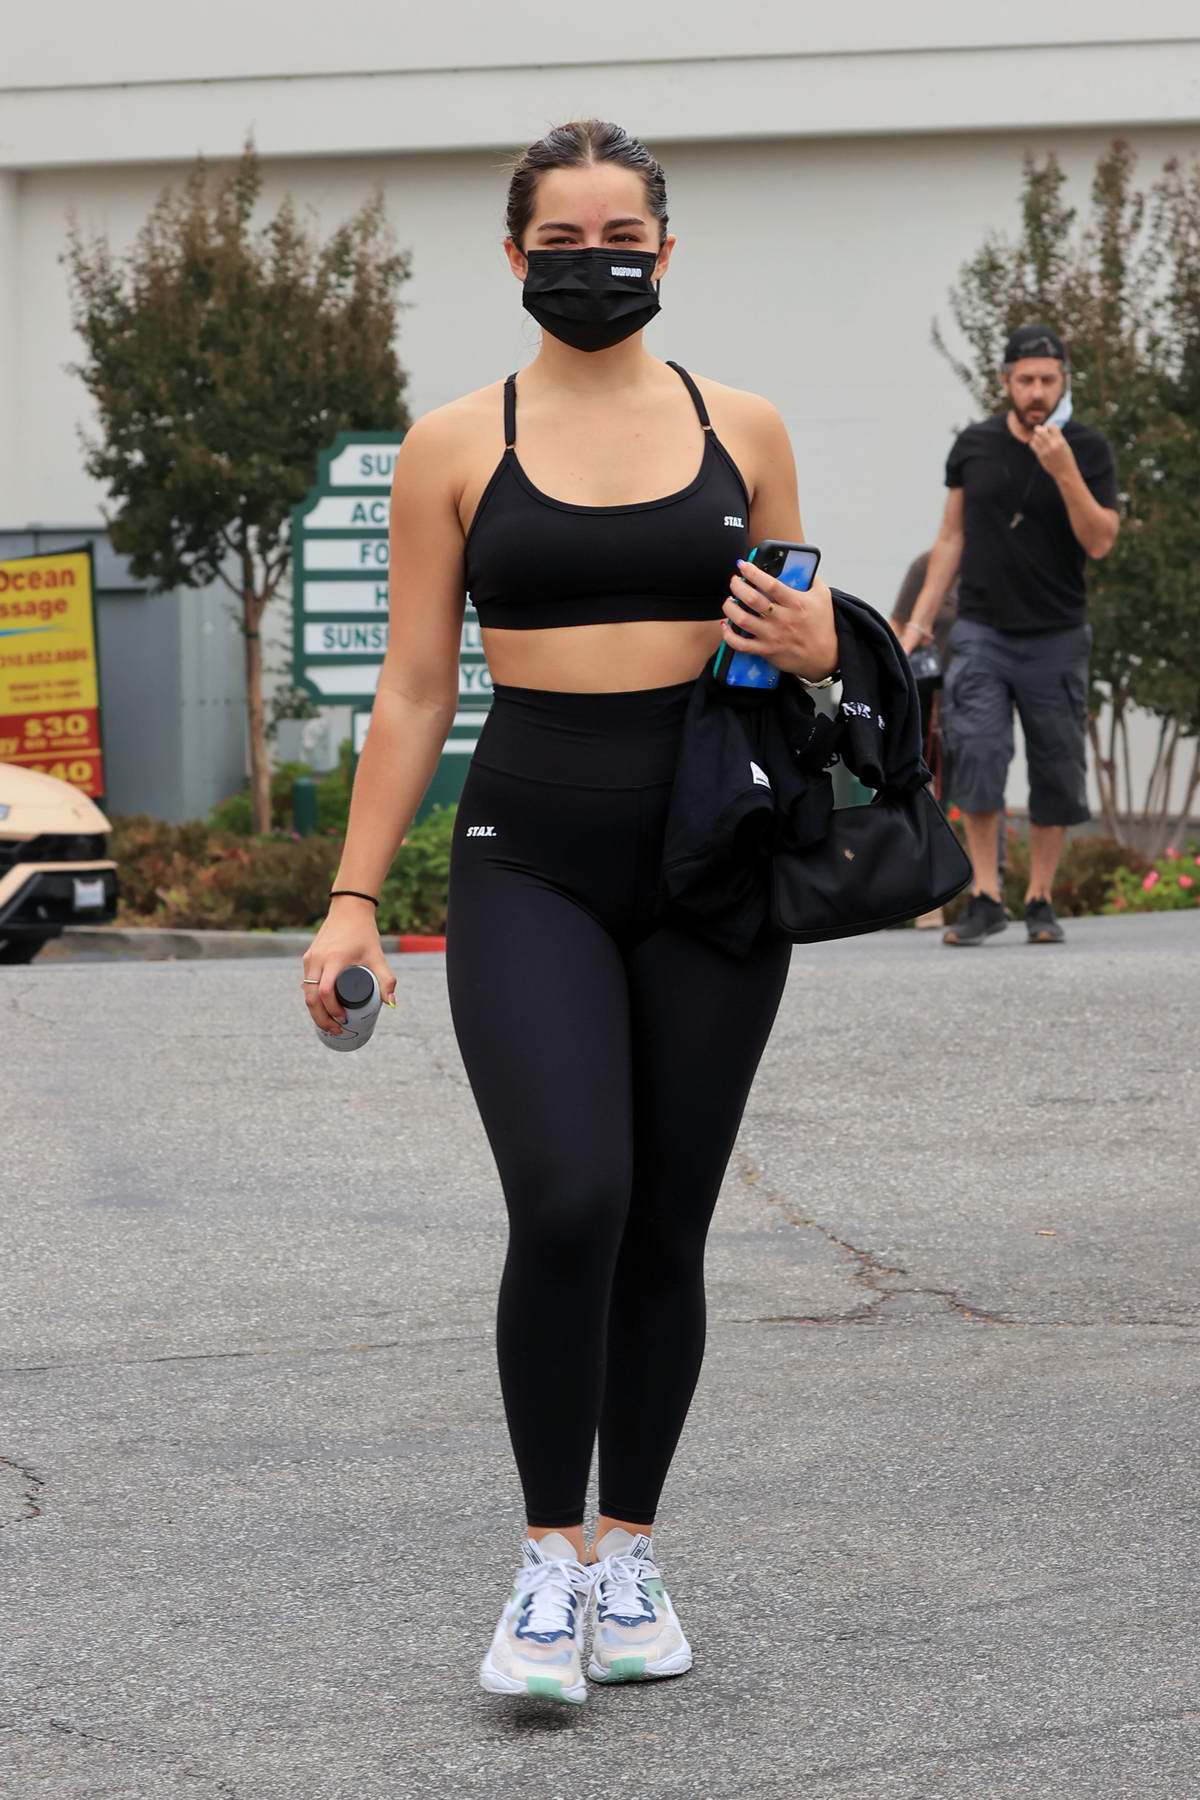 https://www.celebsfirst.com/wp-content/uploads/2020/10/addison-rae-looks-great-in-black-sports-bra-and-leggings-as-she-leaves-a-hot-yoga-class-in-west-hollywood-california-211020_4.jpg